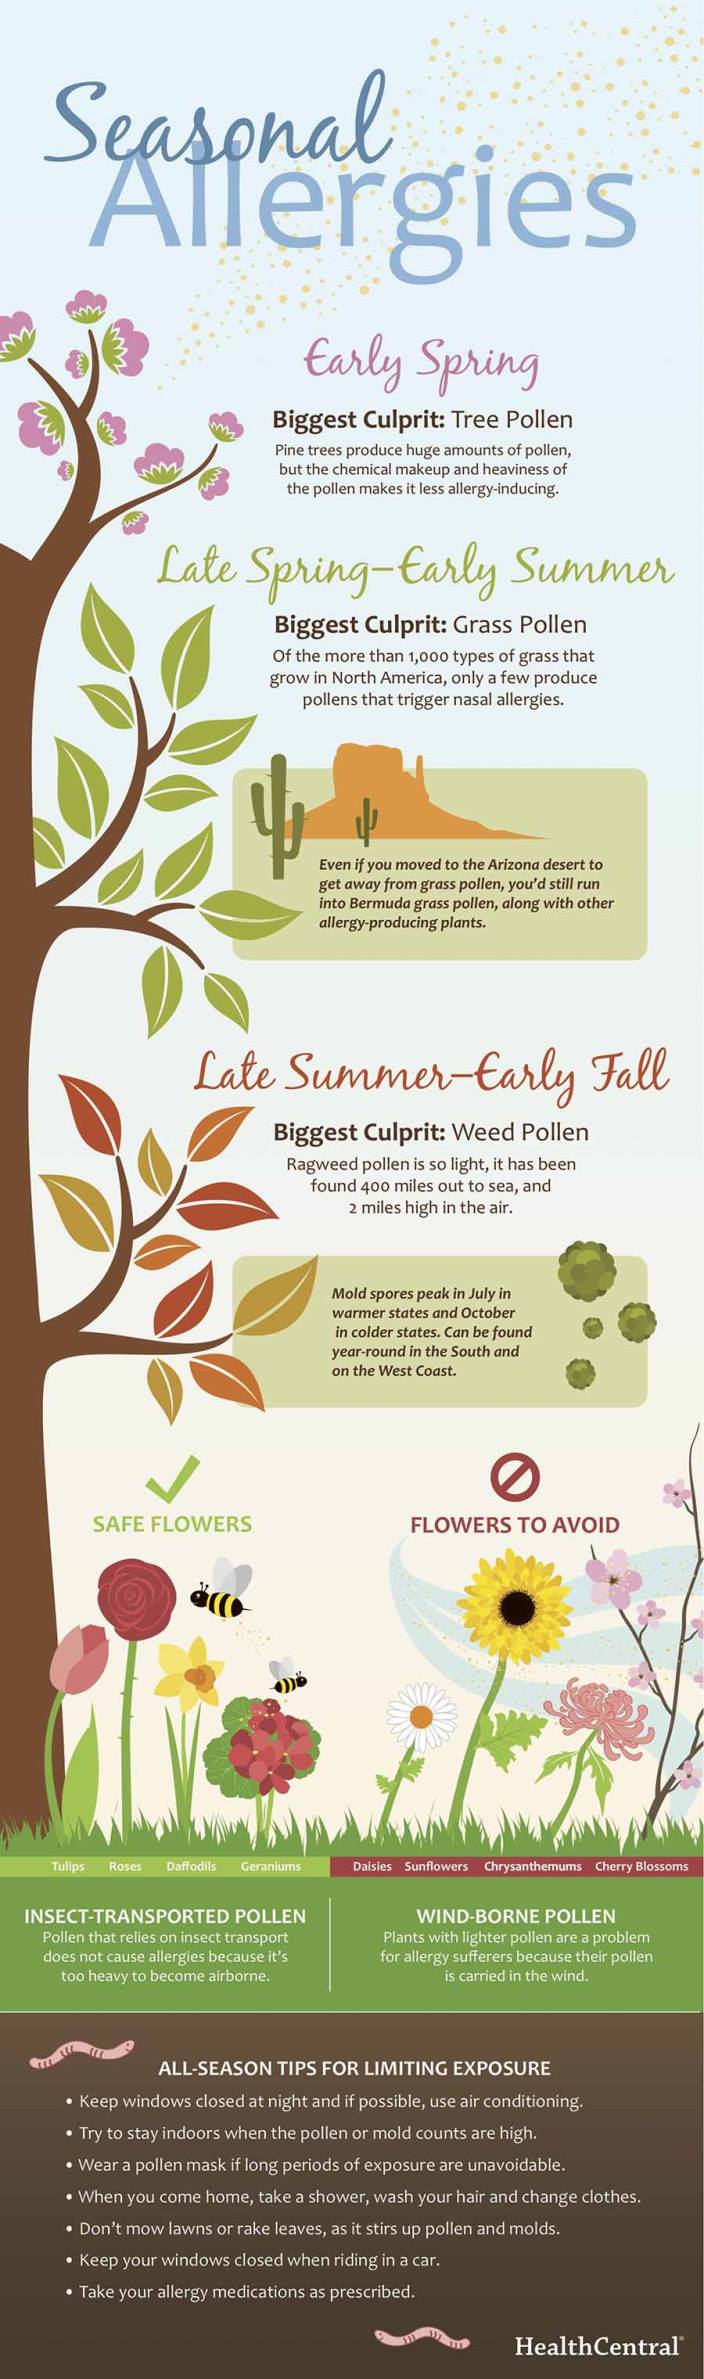 Infographic Allergy season is here! MSD Manual Consumer Version